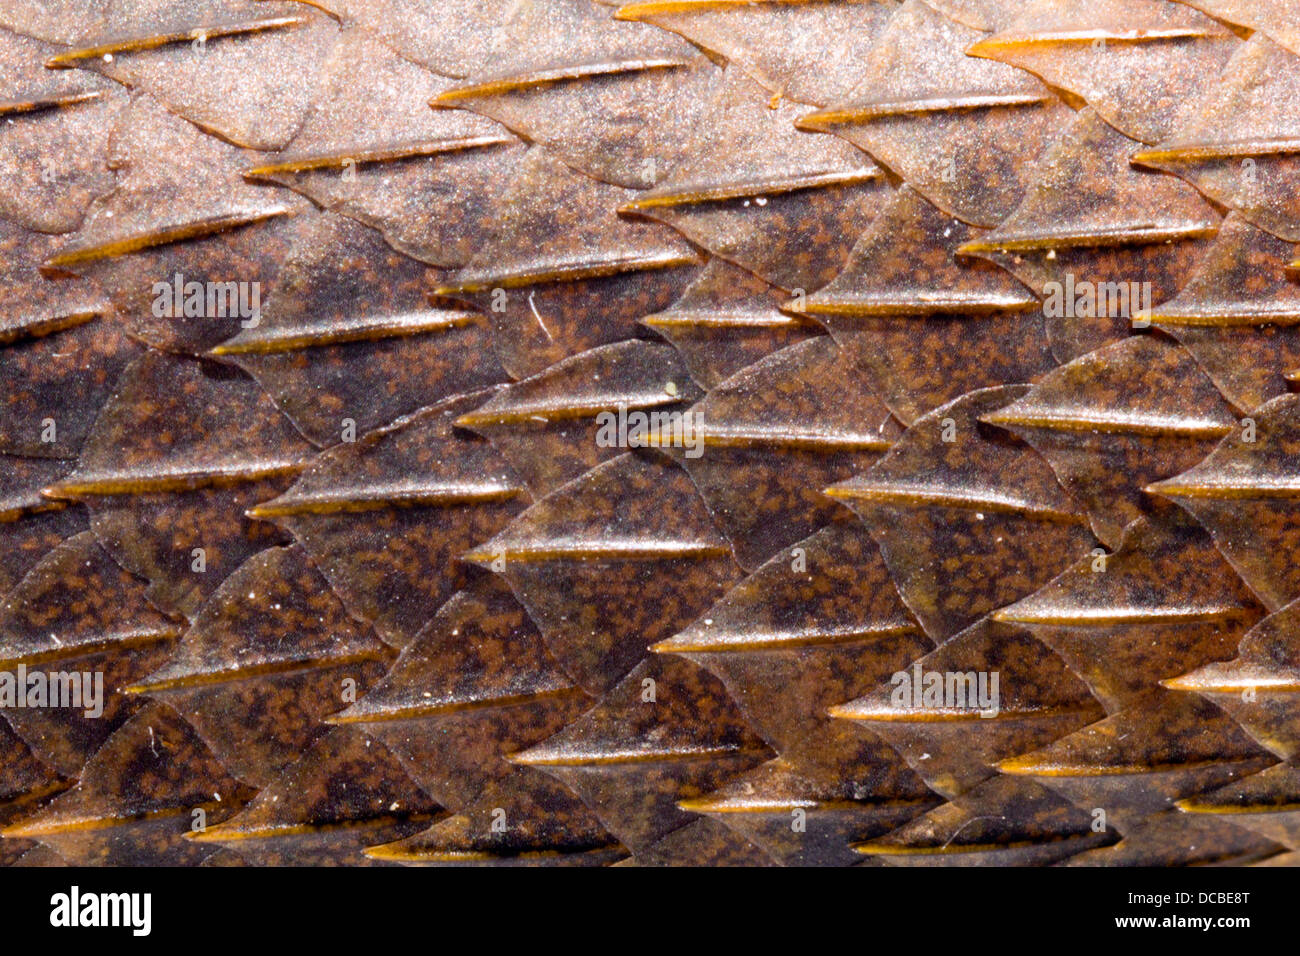 Skin of a small Amazonian lizard Alopoglossus atriventris with keeled scales, Ecuador Stock Photo